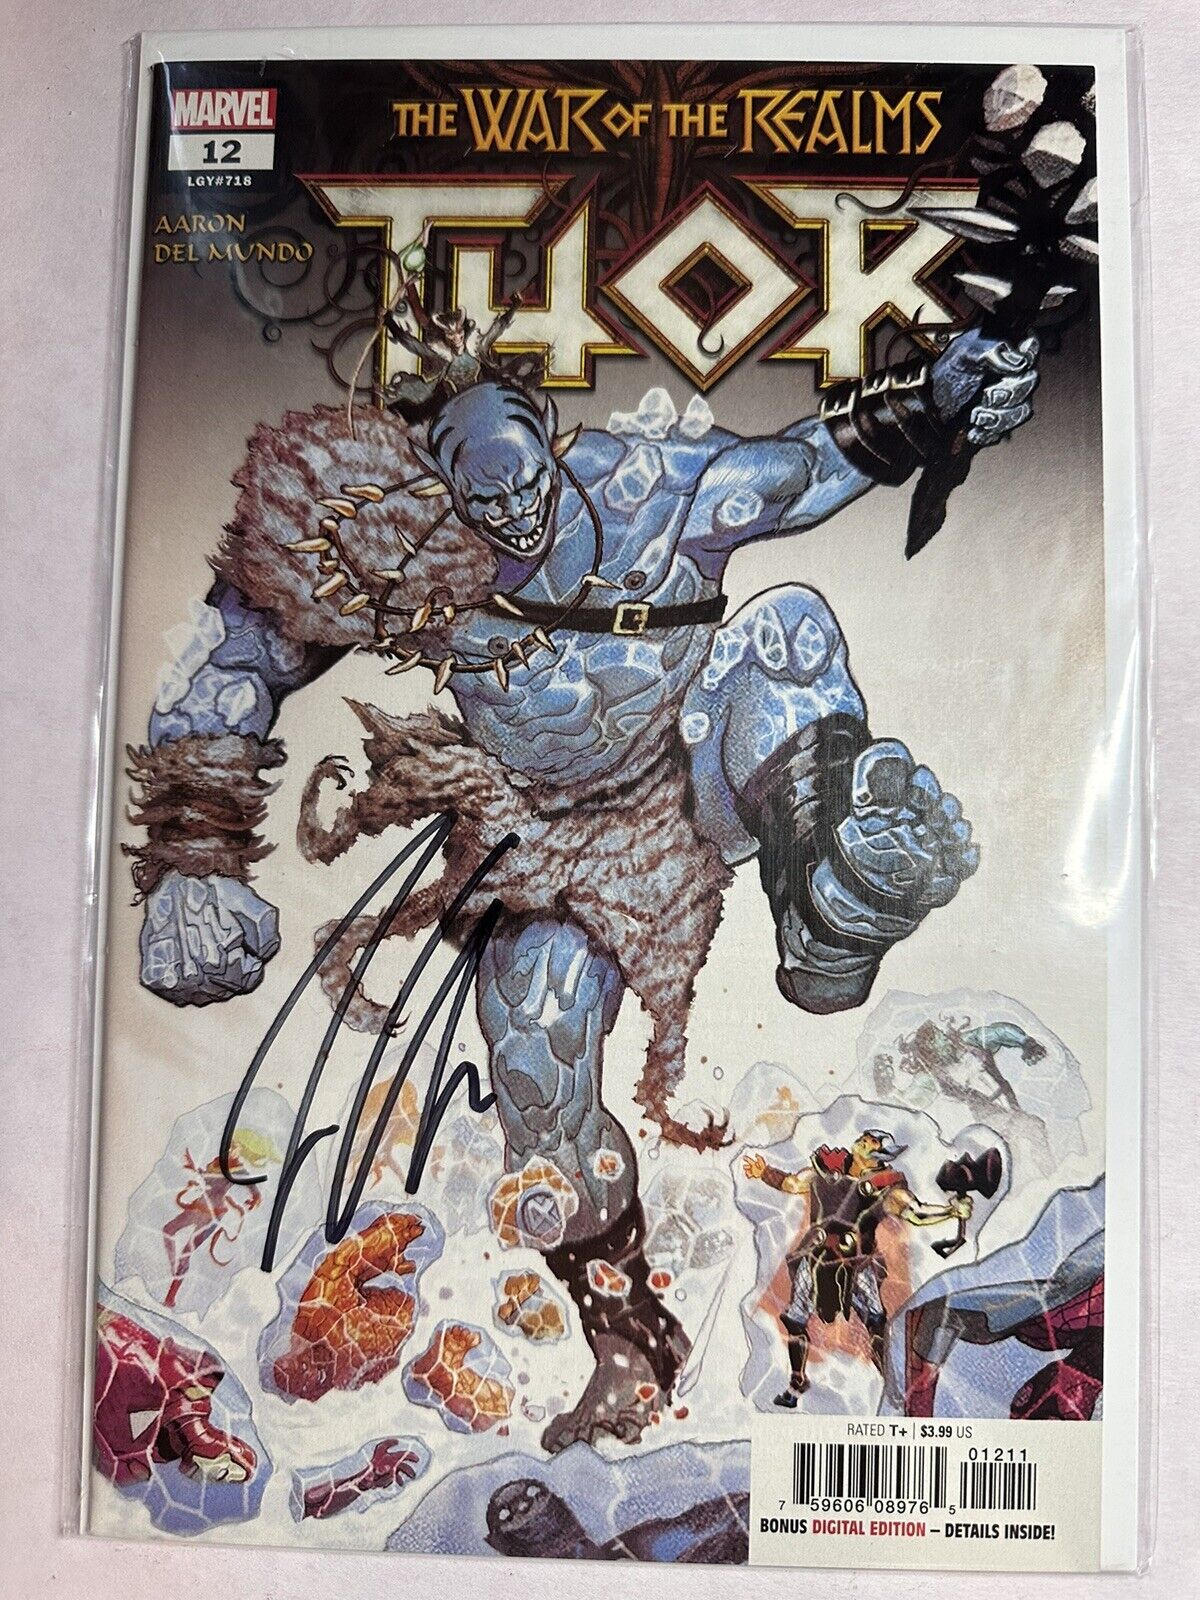 THOR #12 VOL. 5 MARVEL COMIC BOOK SIGNED BY JASON AARON WITH COA